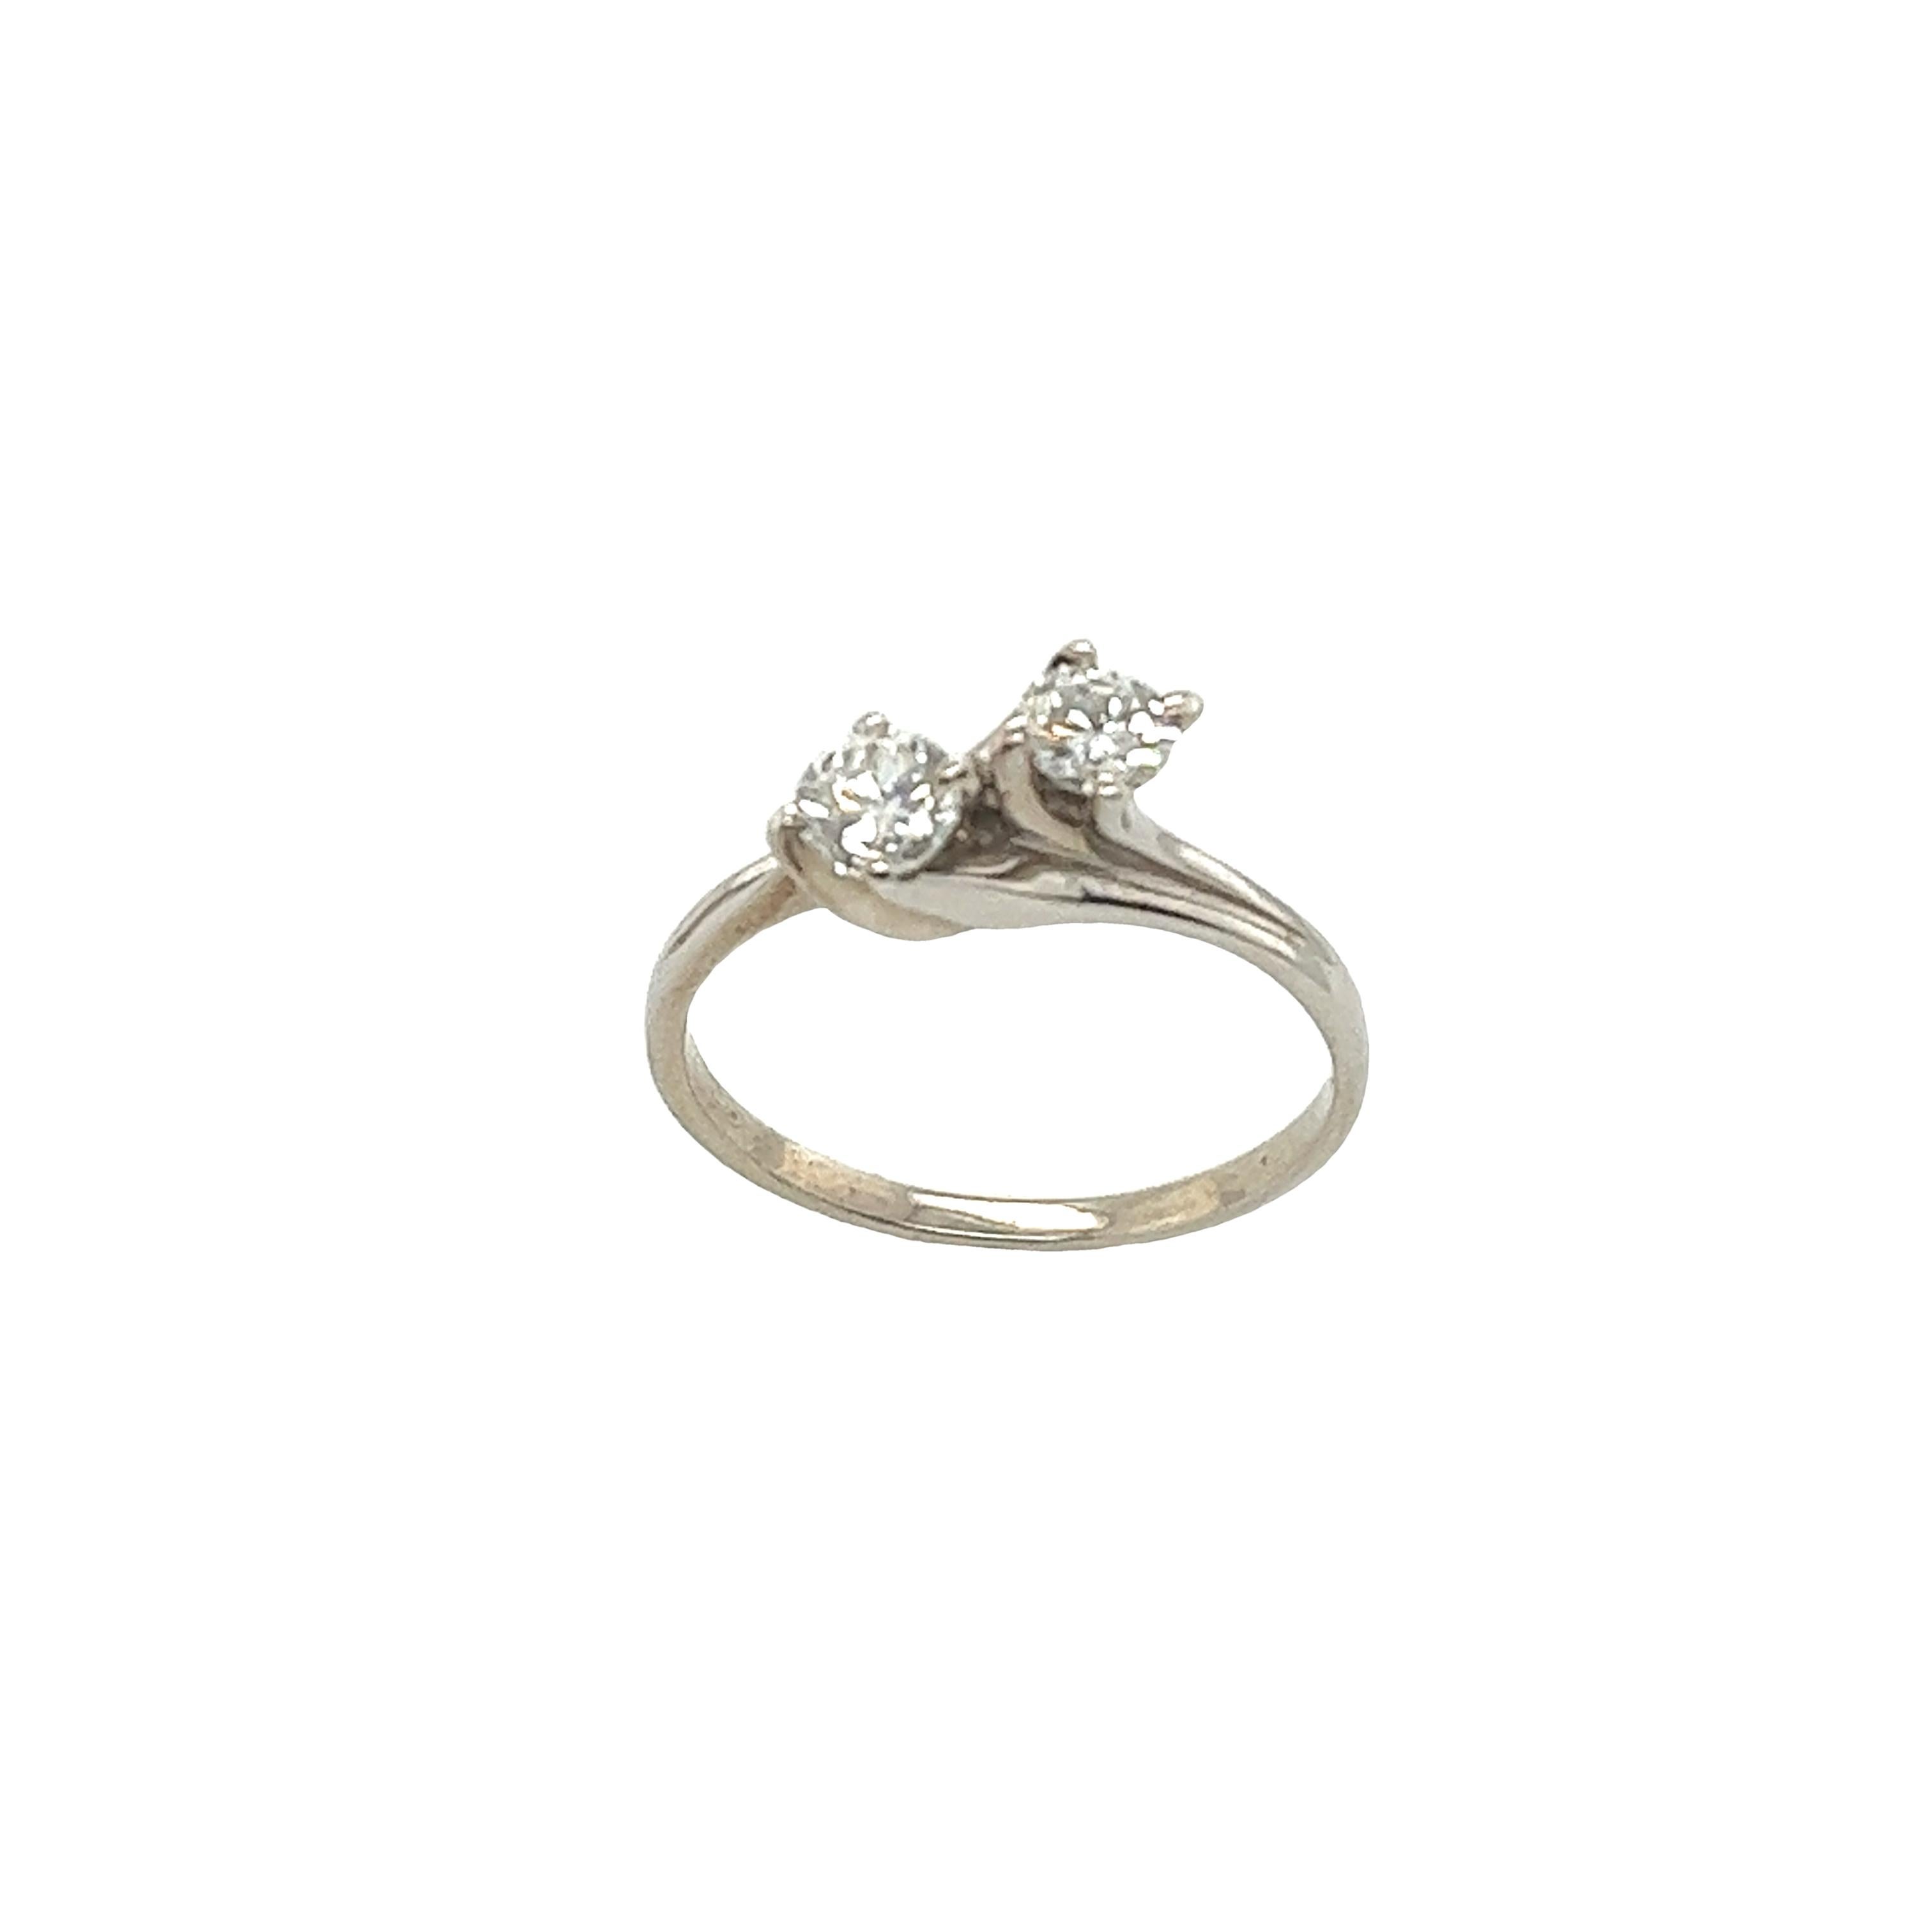 This preloved classic 2 stone crossover ring with total diamond weight 0.50ct G/SI1. A timeless symbol of everlasting love.
Total Diamond Weight: 0.50ct
Diamond Colour: H
Diamond Clarity: SI1
Width of Band: 1.60mm
Width of Head: 5.50mm
Length of